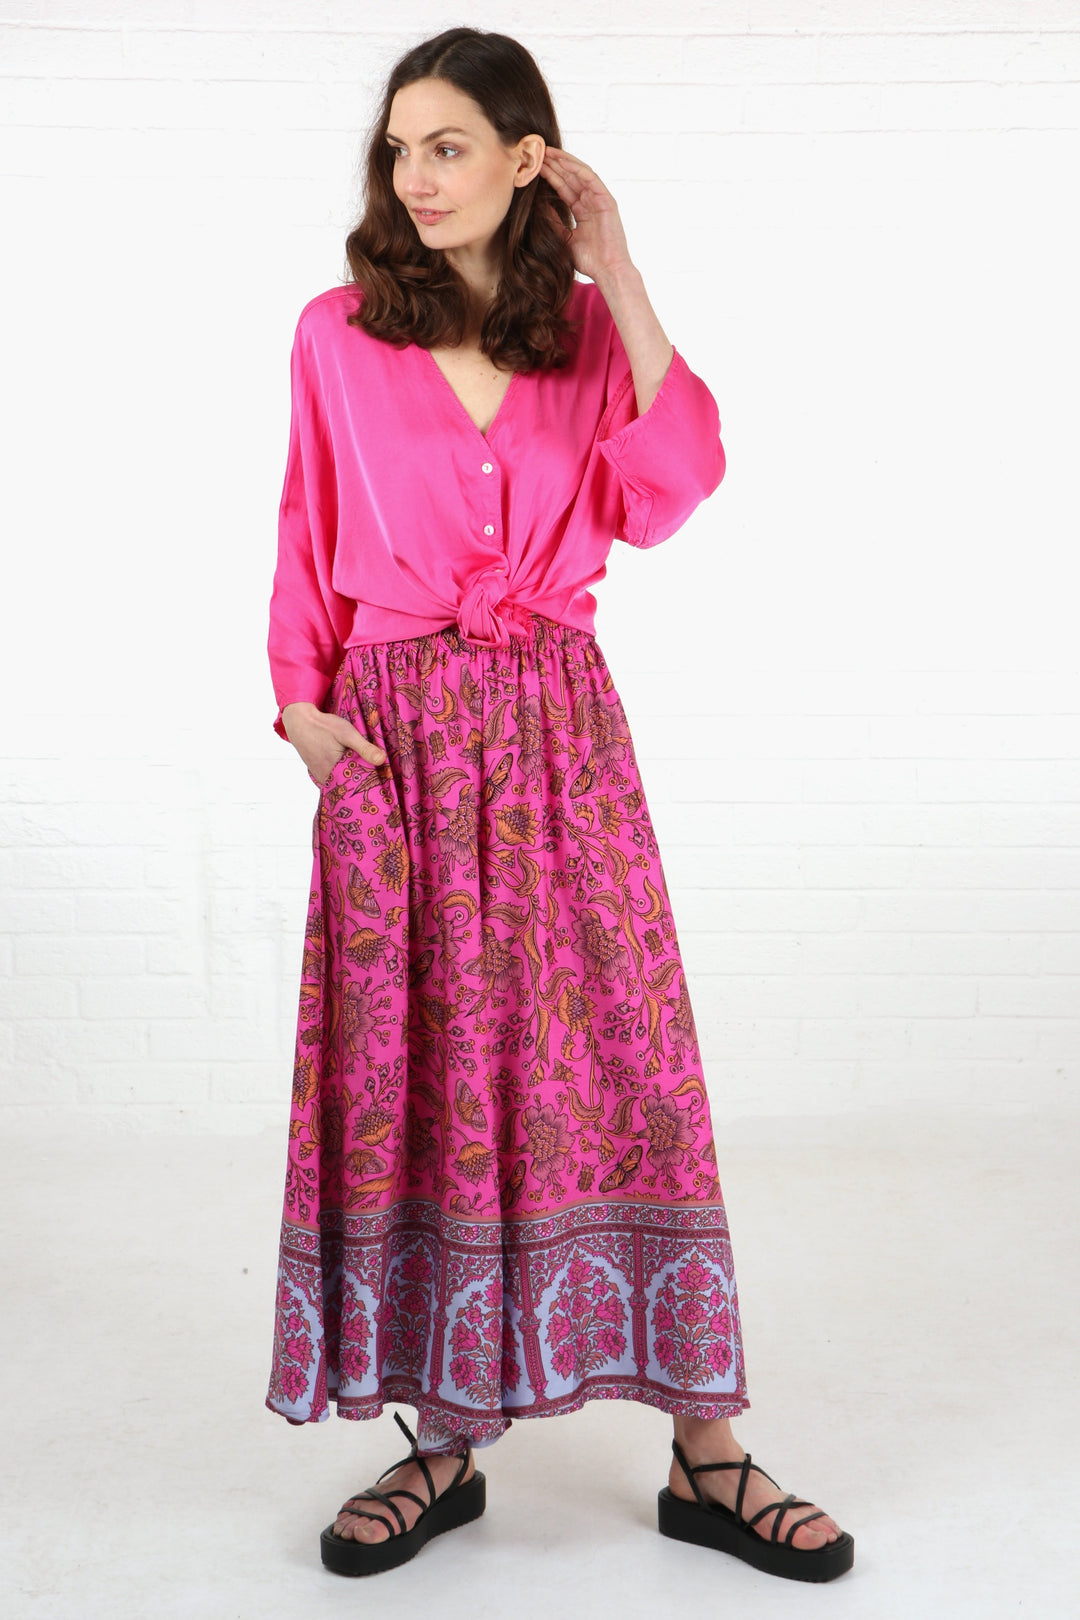 wide leg palazzo trousers in pink with an ornate floral and butterfly pattern, the palazzos have pockets